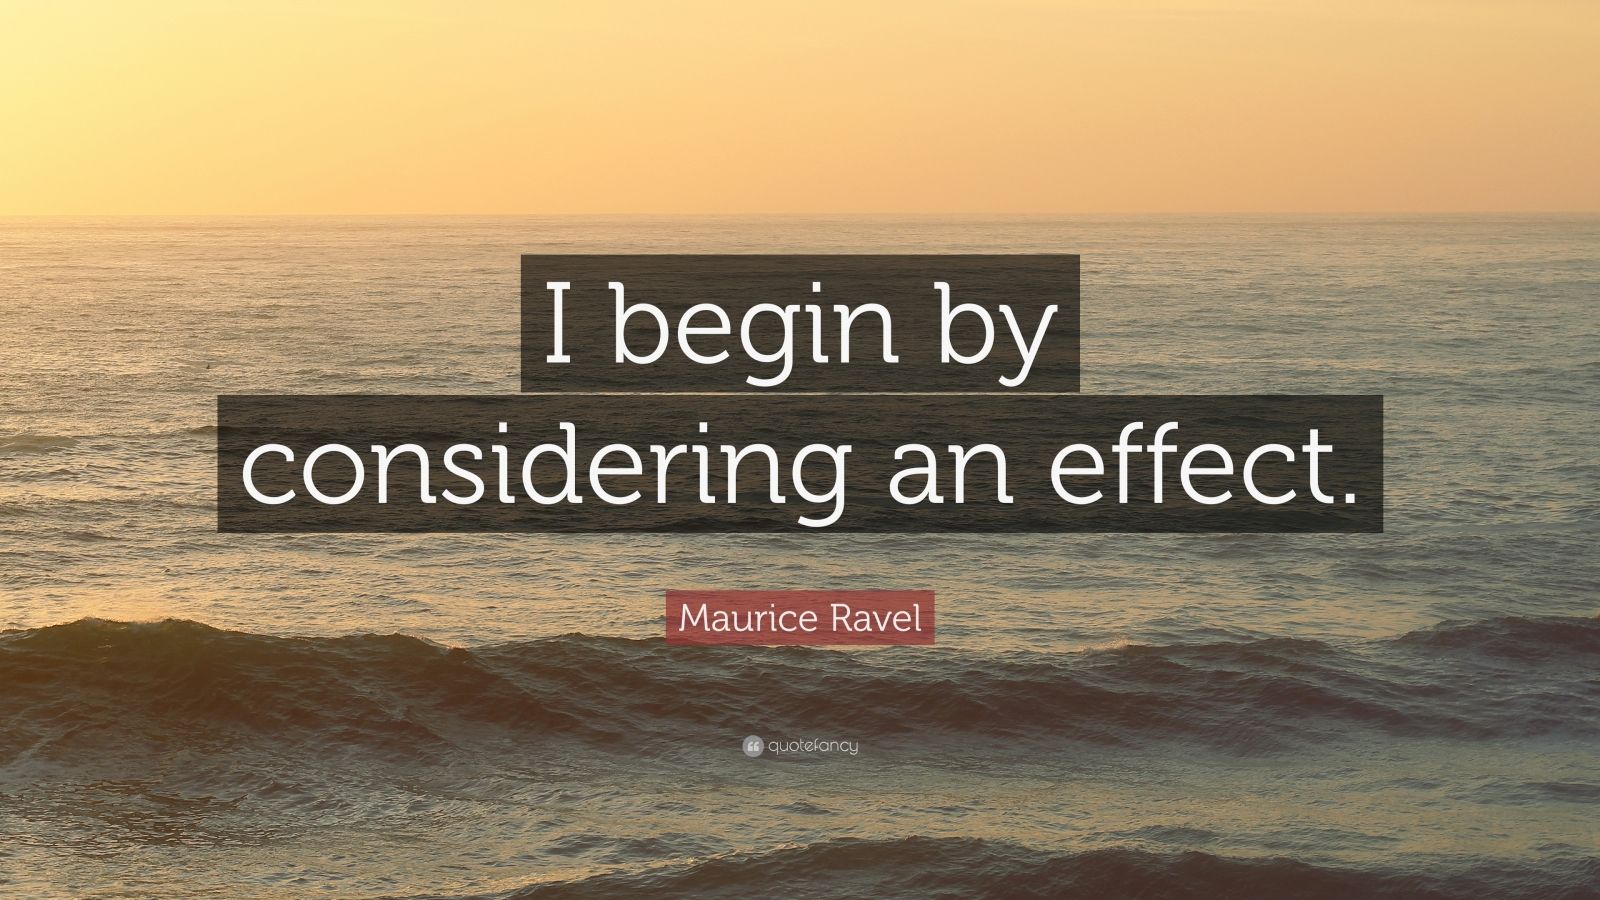 Maurice Ravel Quote: “I begin by considering an effect.” (7 wallpapers ...